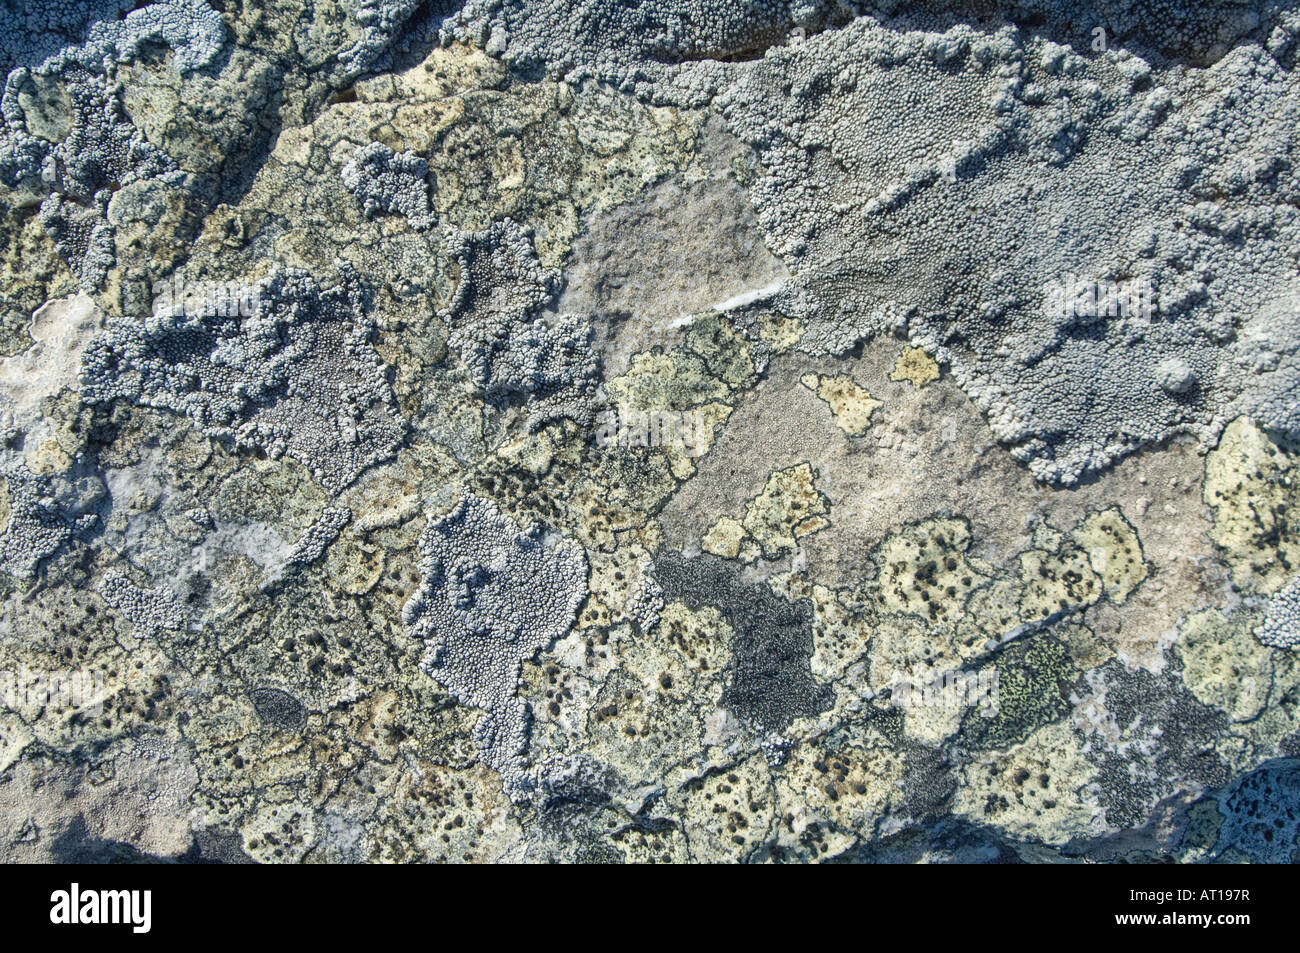 Variety of Lichen cover quartzite rocks at Ordnance Point Gypsy Cove Stanley East Falkland South Atlantic Ocean December Stock Photo